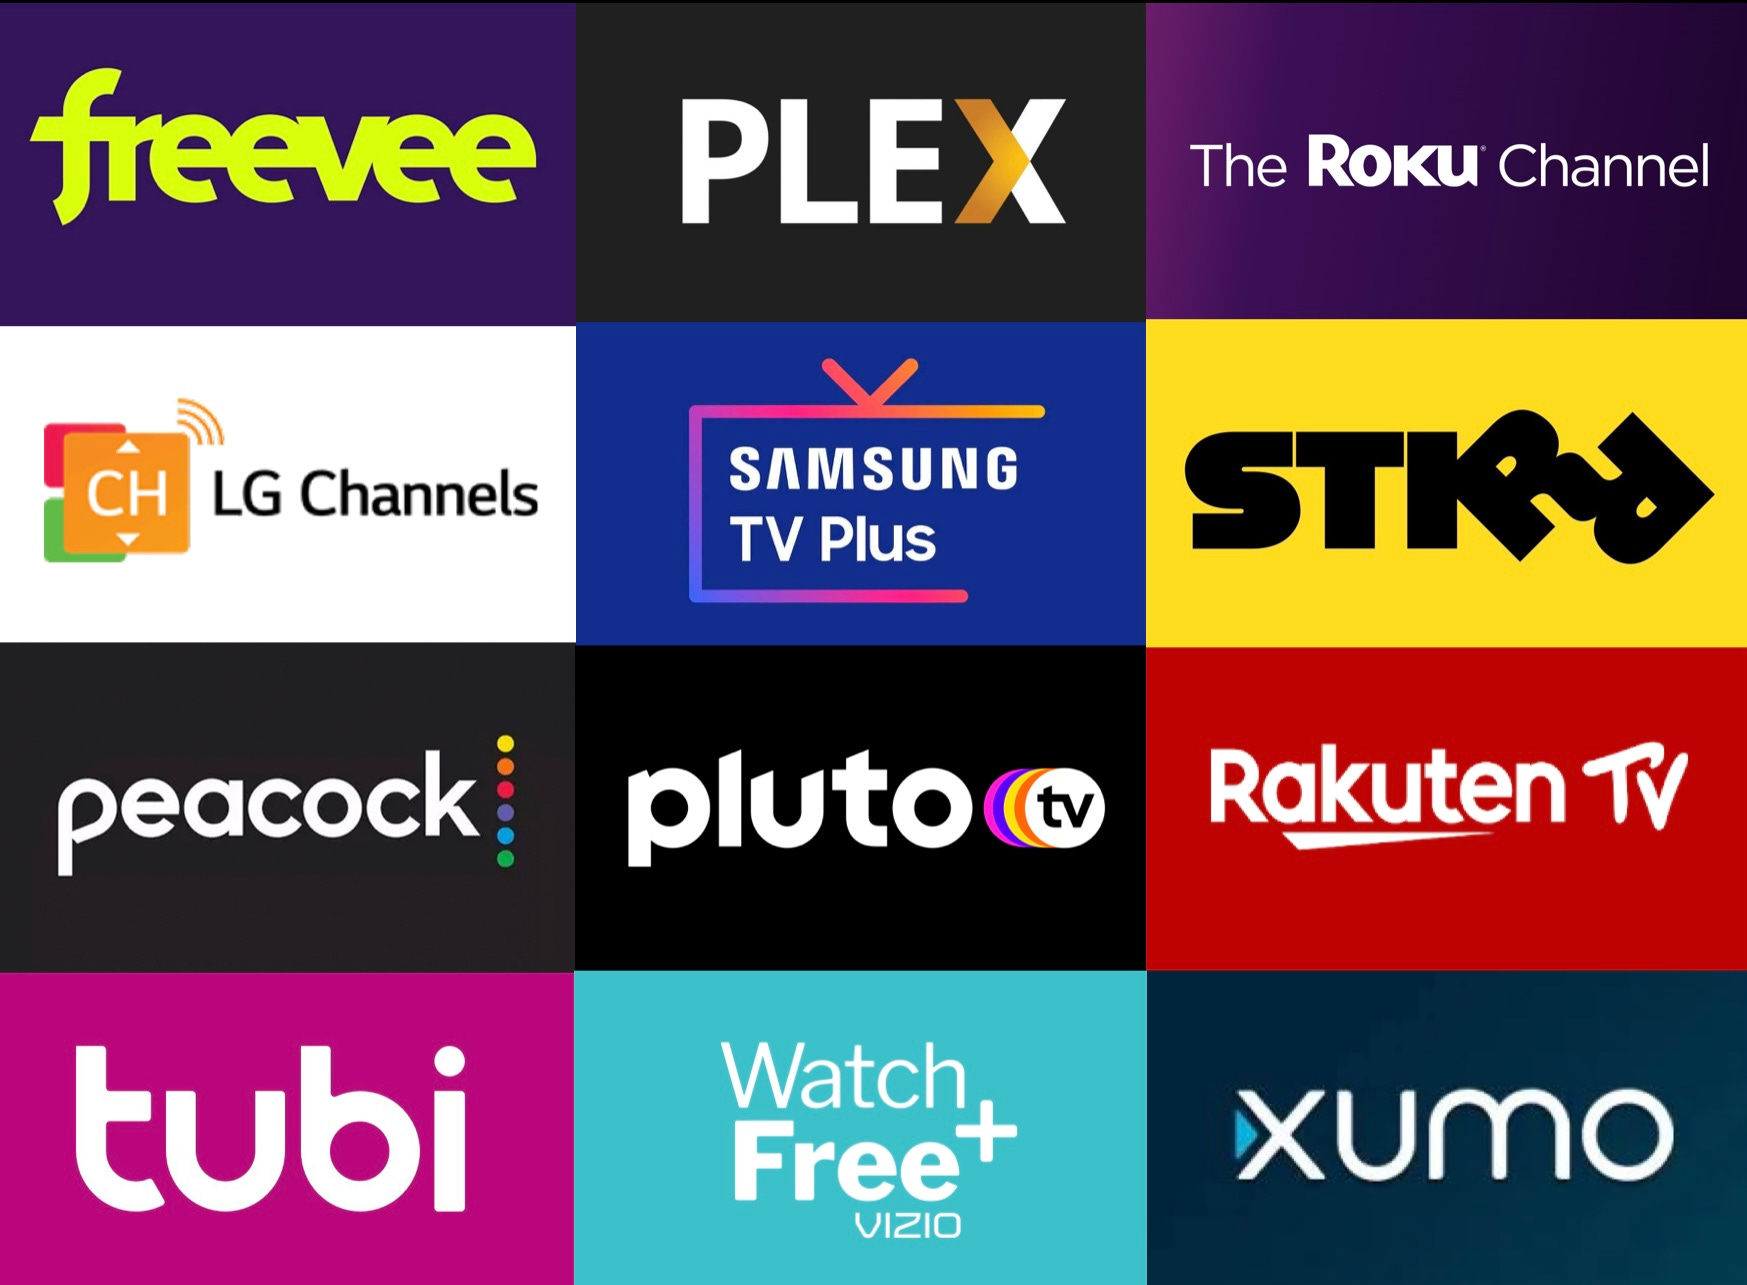 to launch free TV channels on Prime Video?